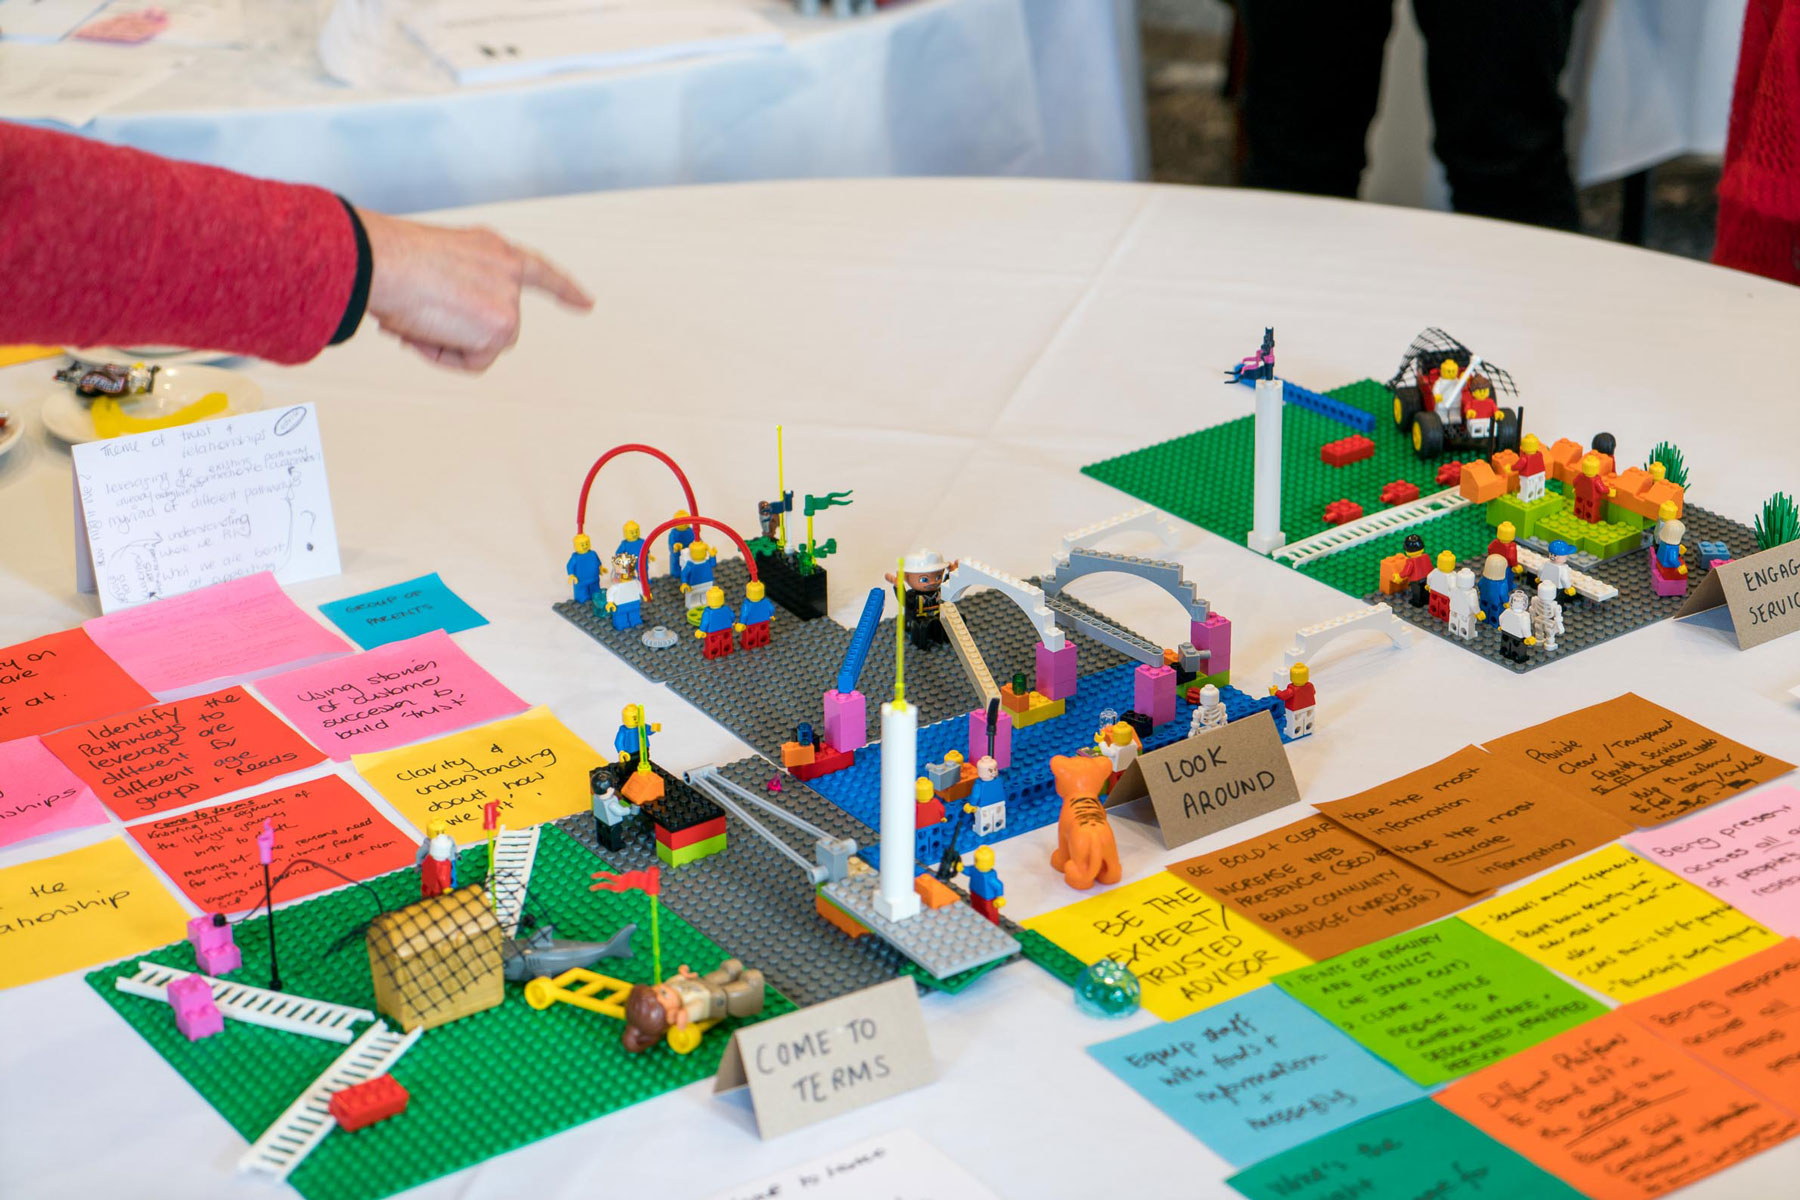 A photo from the lego prototyping workshop where we designed potential future states together with staff from Scope and role played how their service could be improved.